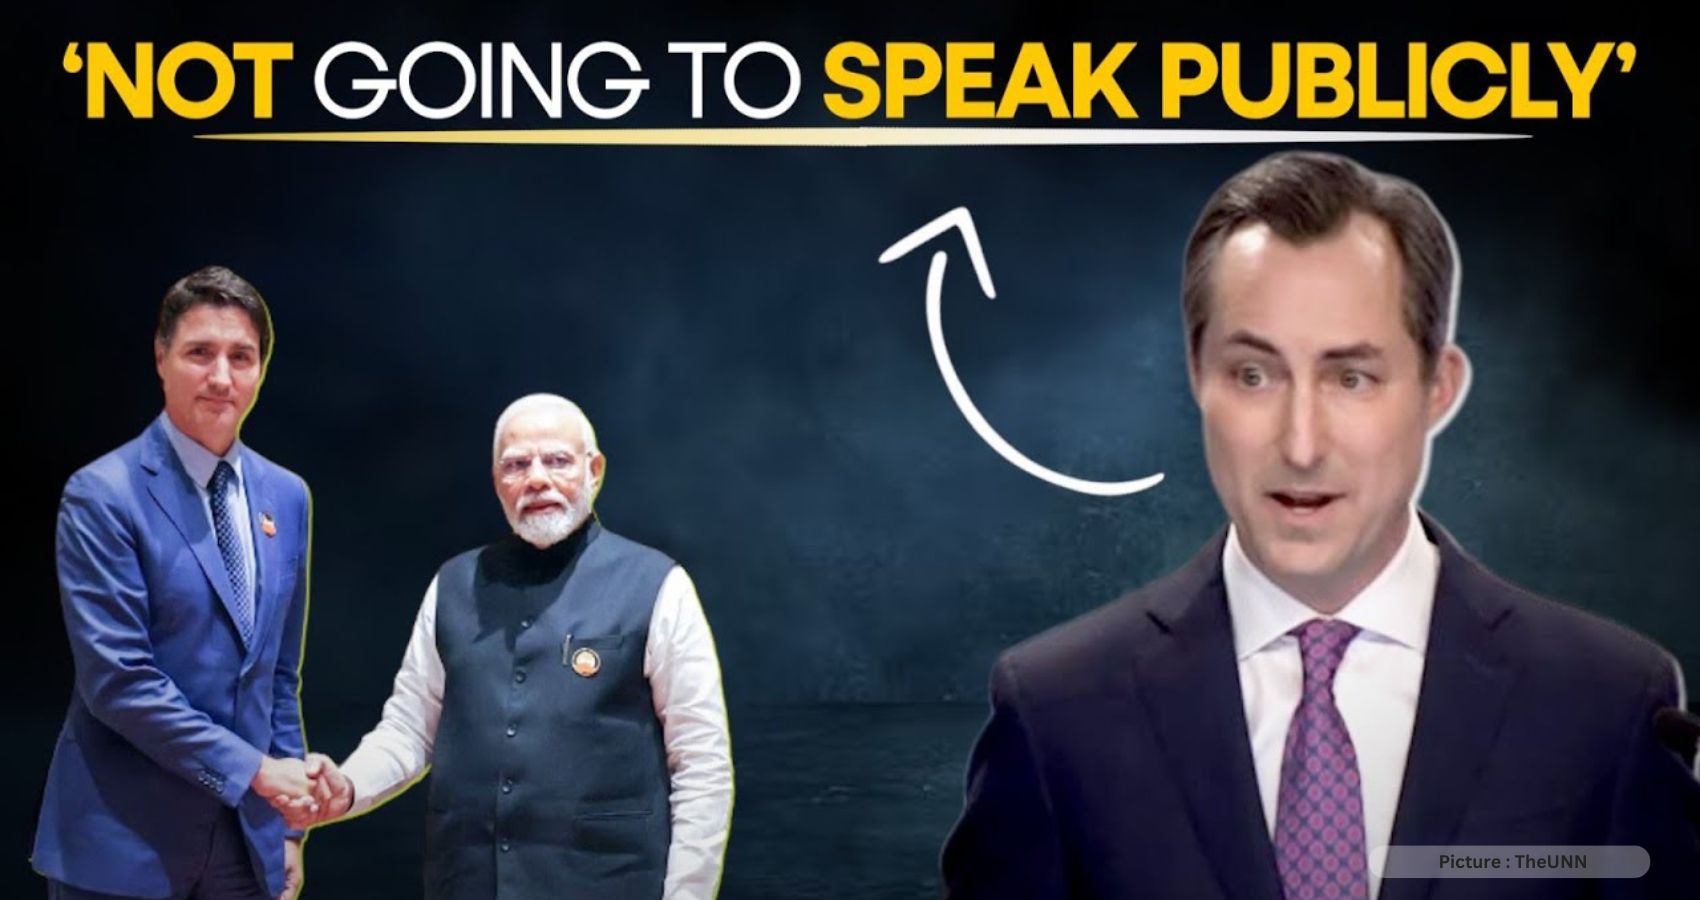 Washington Is Losing Credibility Over the Canada-India Spat